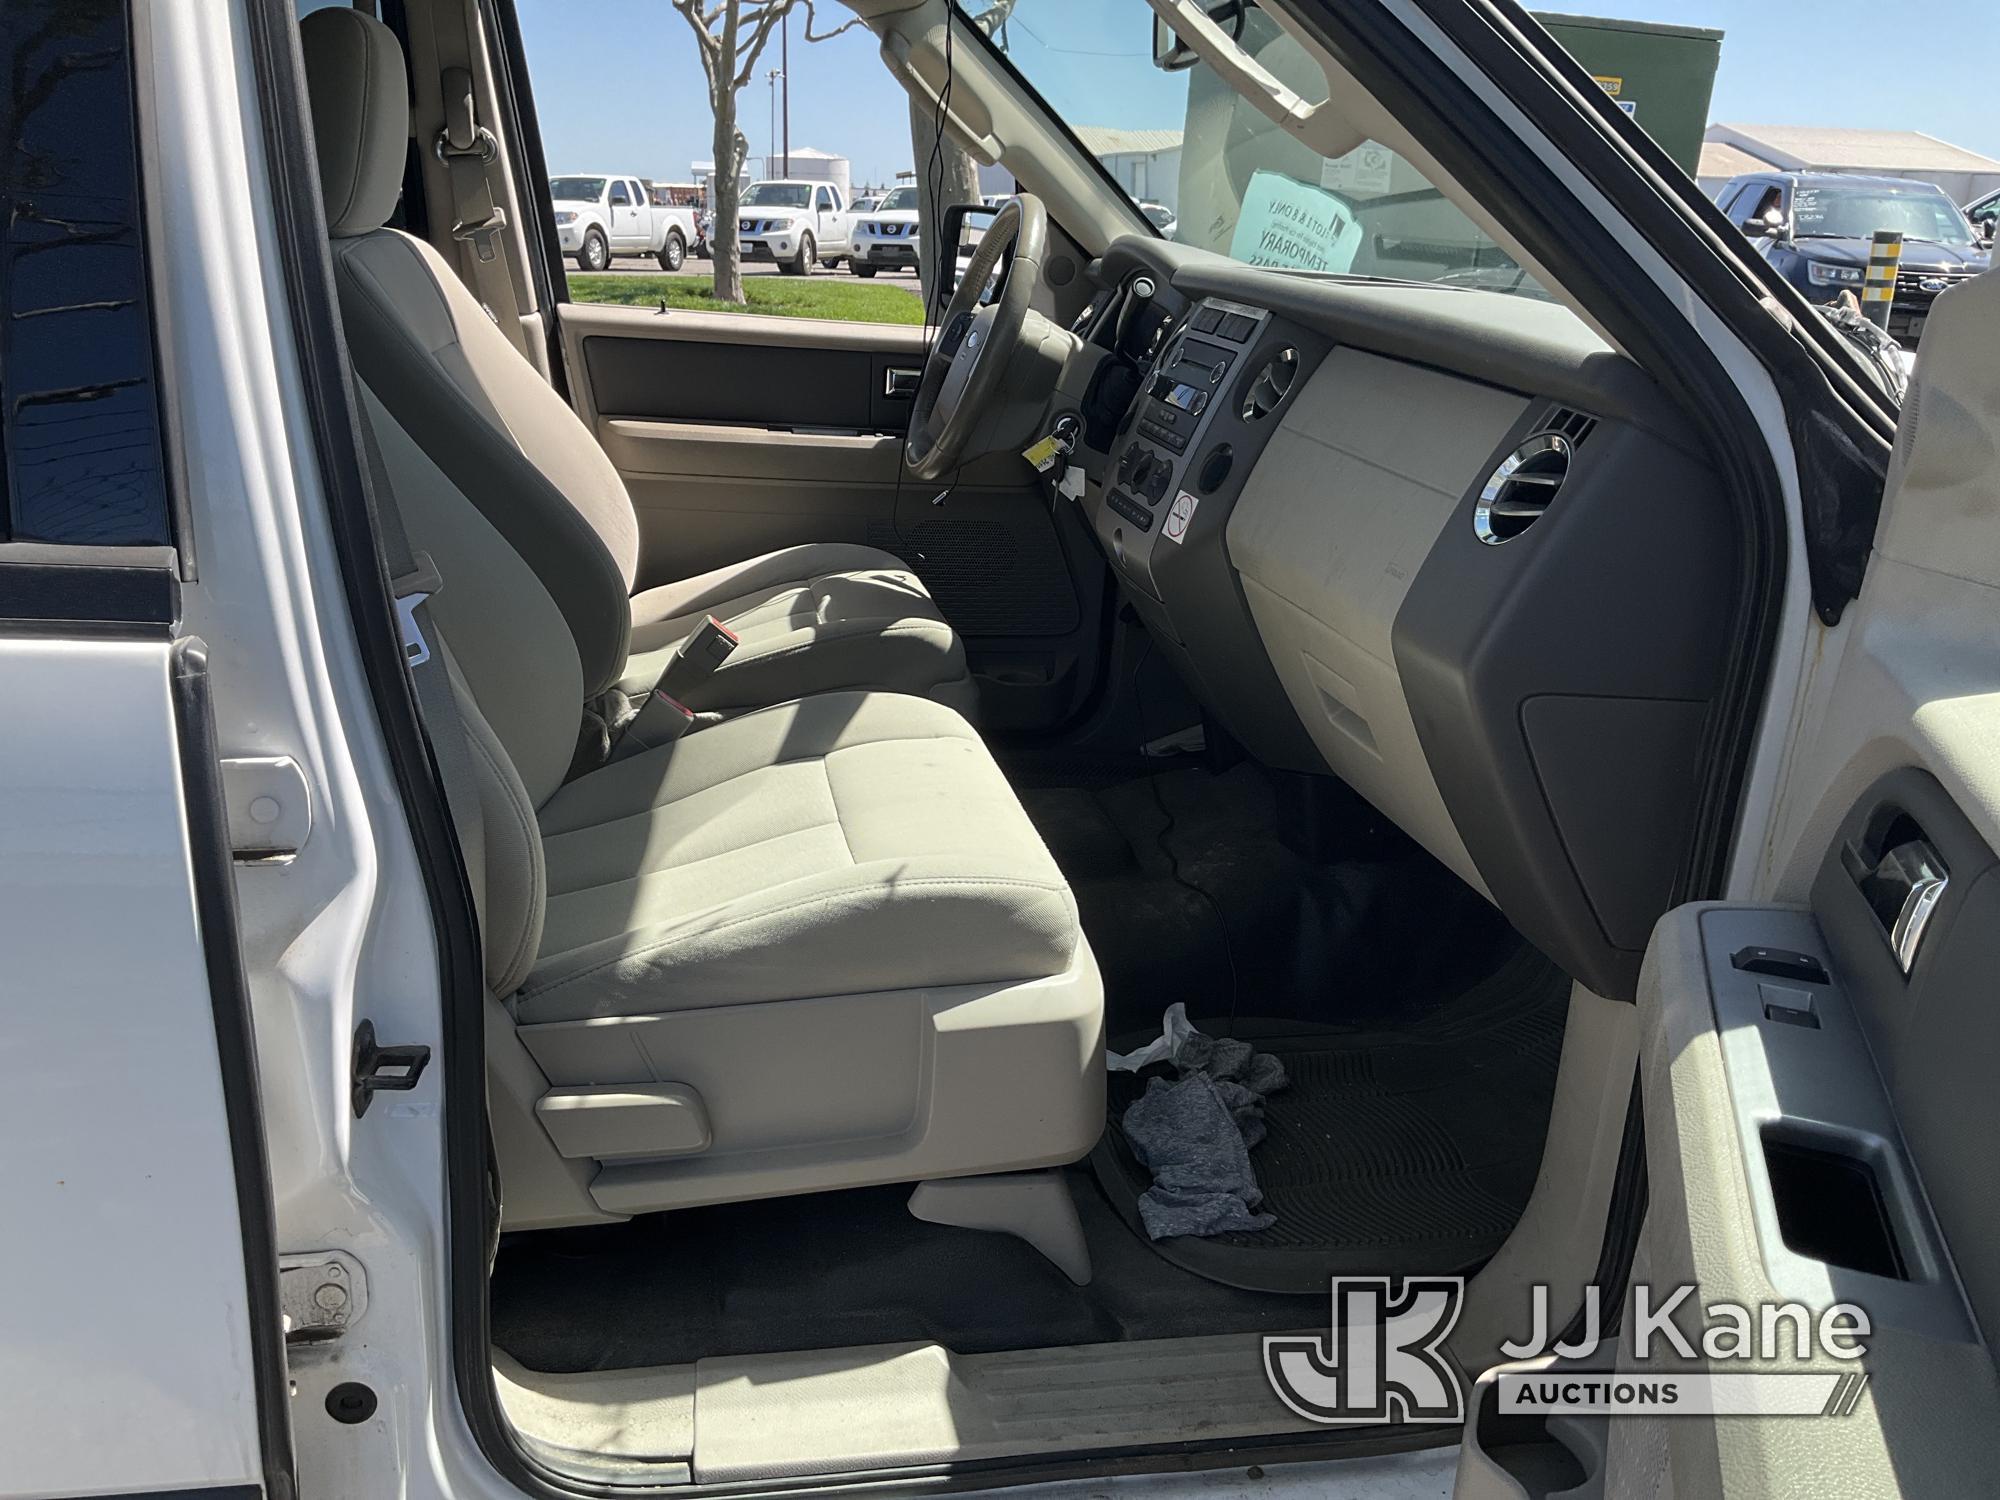 (Dixon, CA) 2014 Ford Expedition 4x4 4-Door Sport Utility Vehicle Runs & Moves) (Driver Window Will